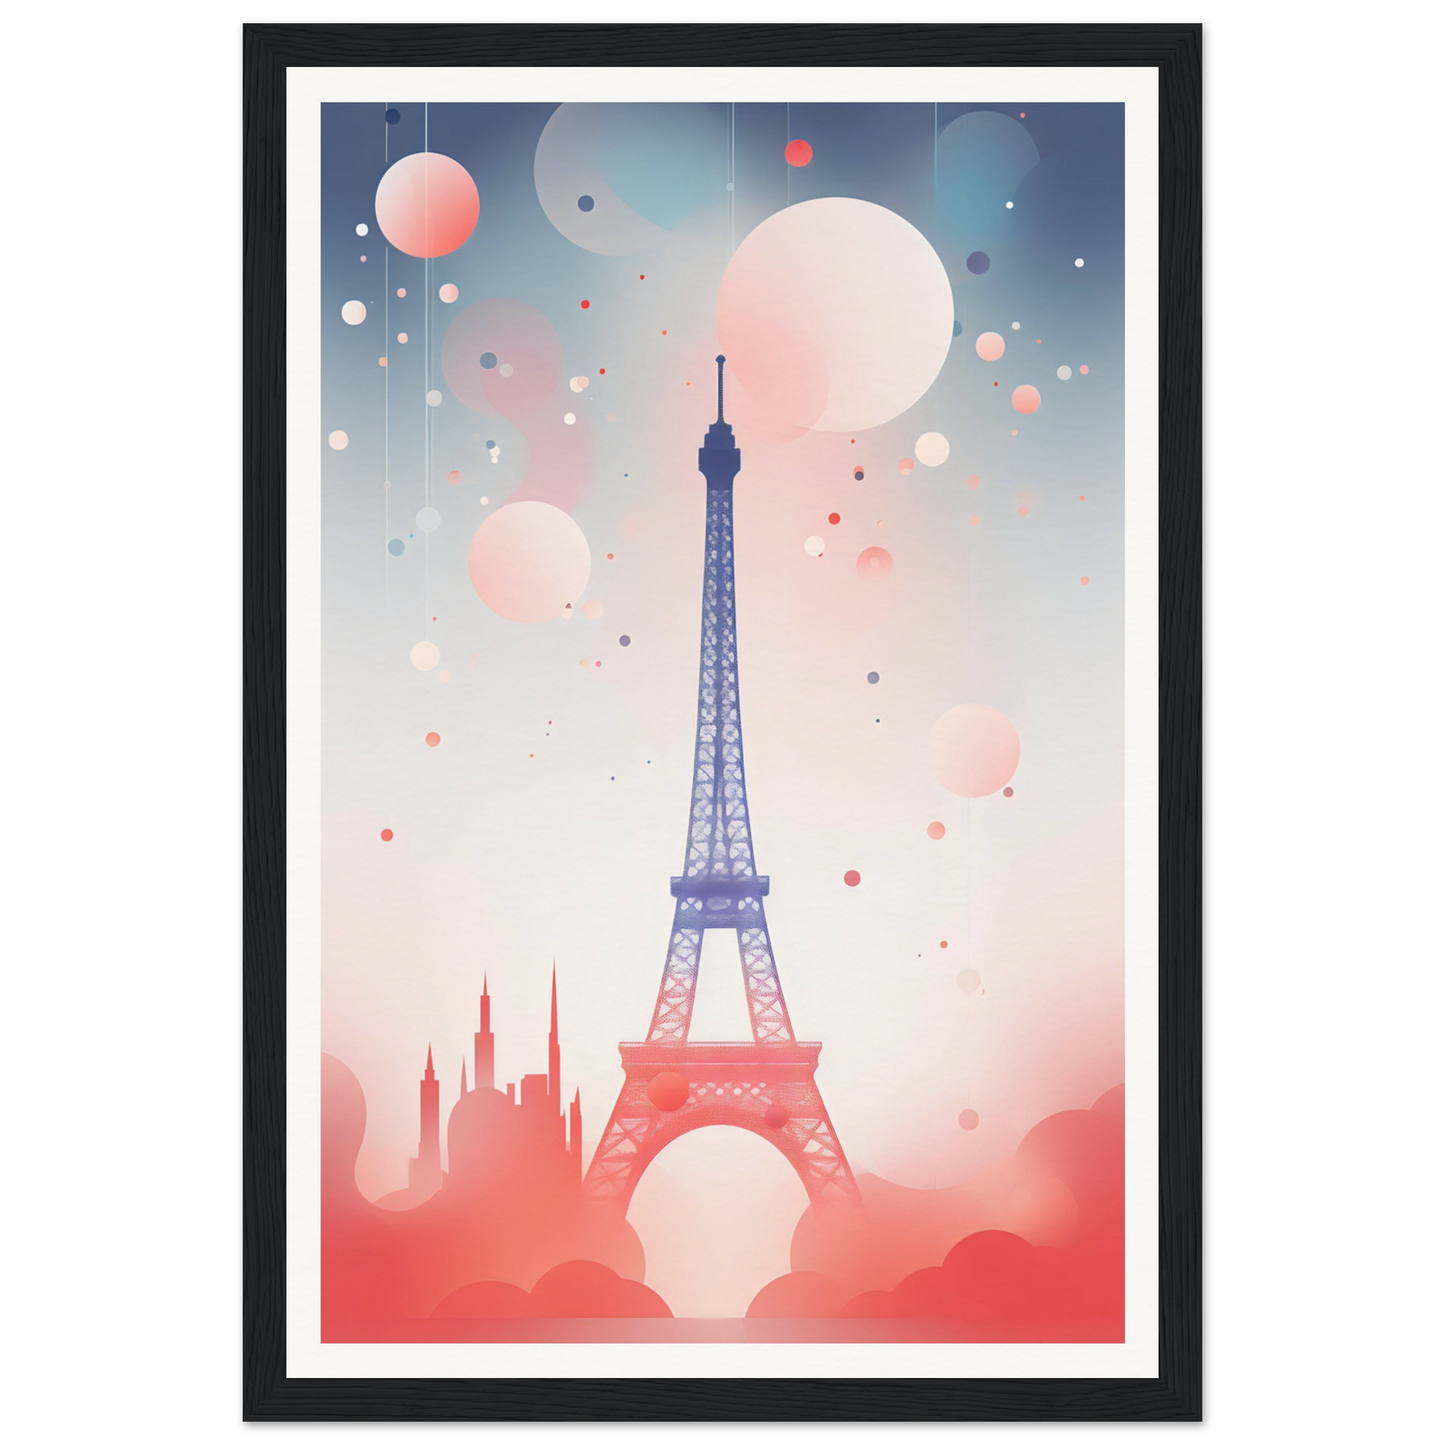 I recently purchased a Fantasia, Eiffel, Paris. The Oracle Windows™ Collection art poster for my wall featuring the Paris Eiffel Tower.